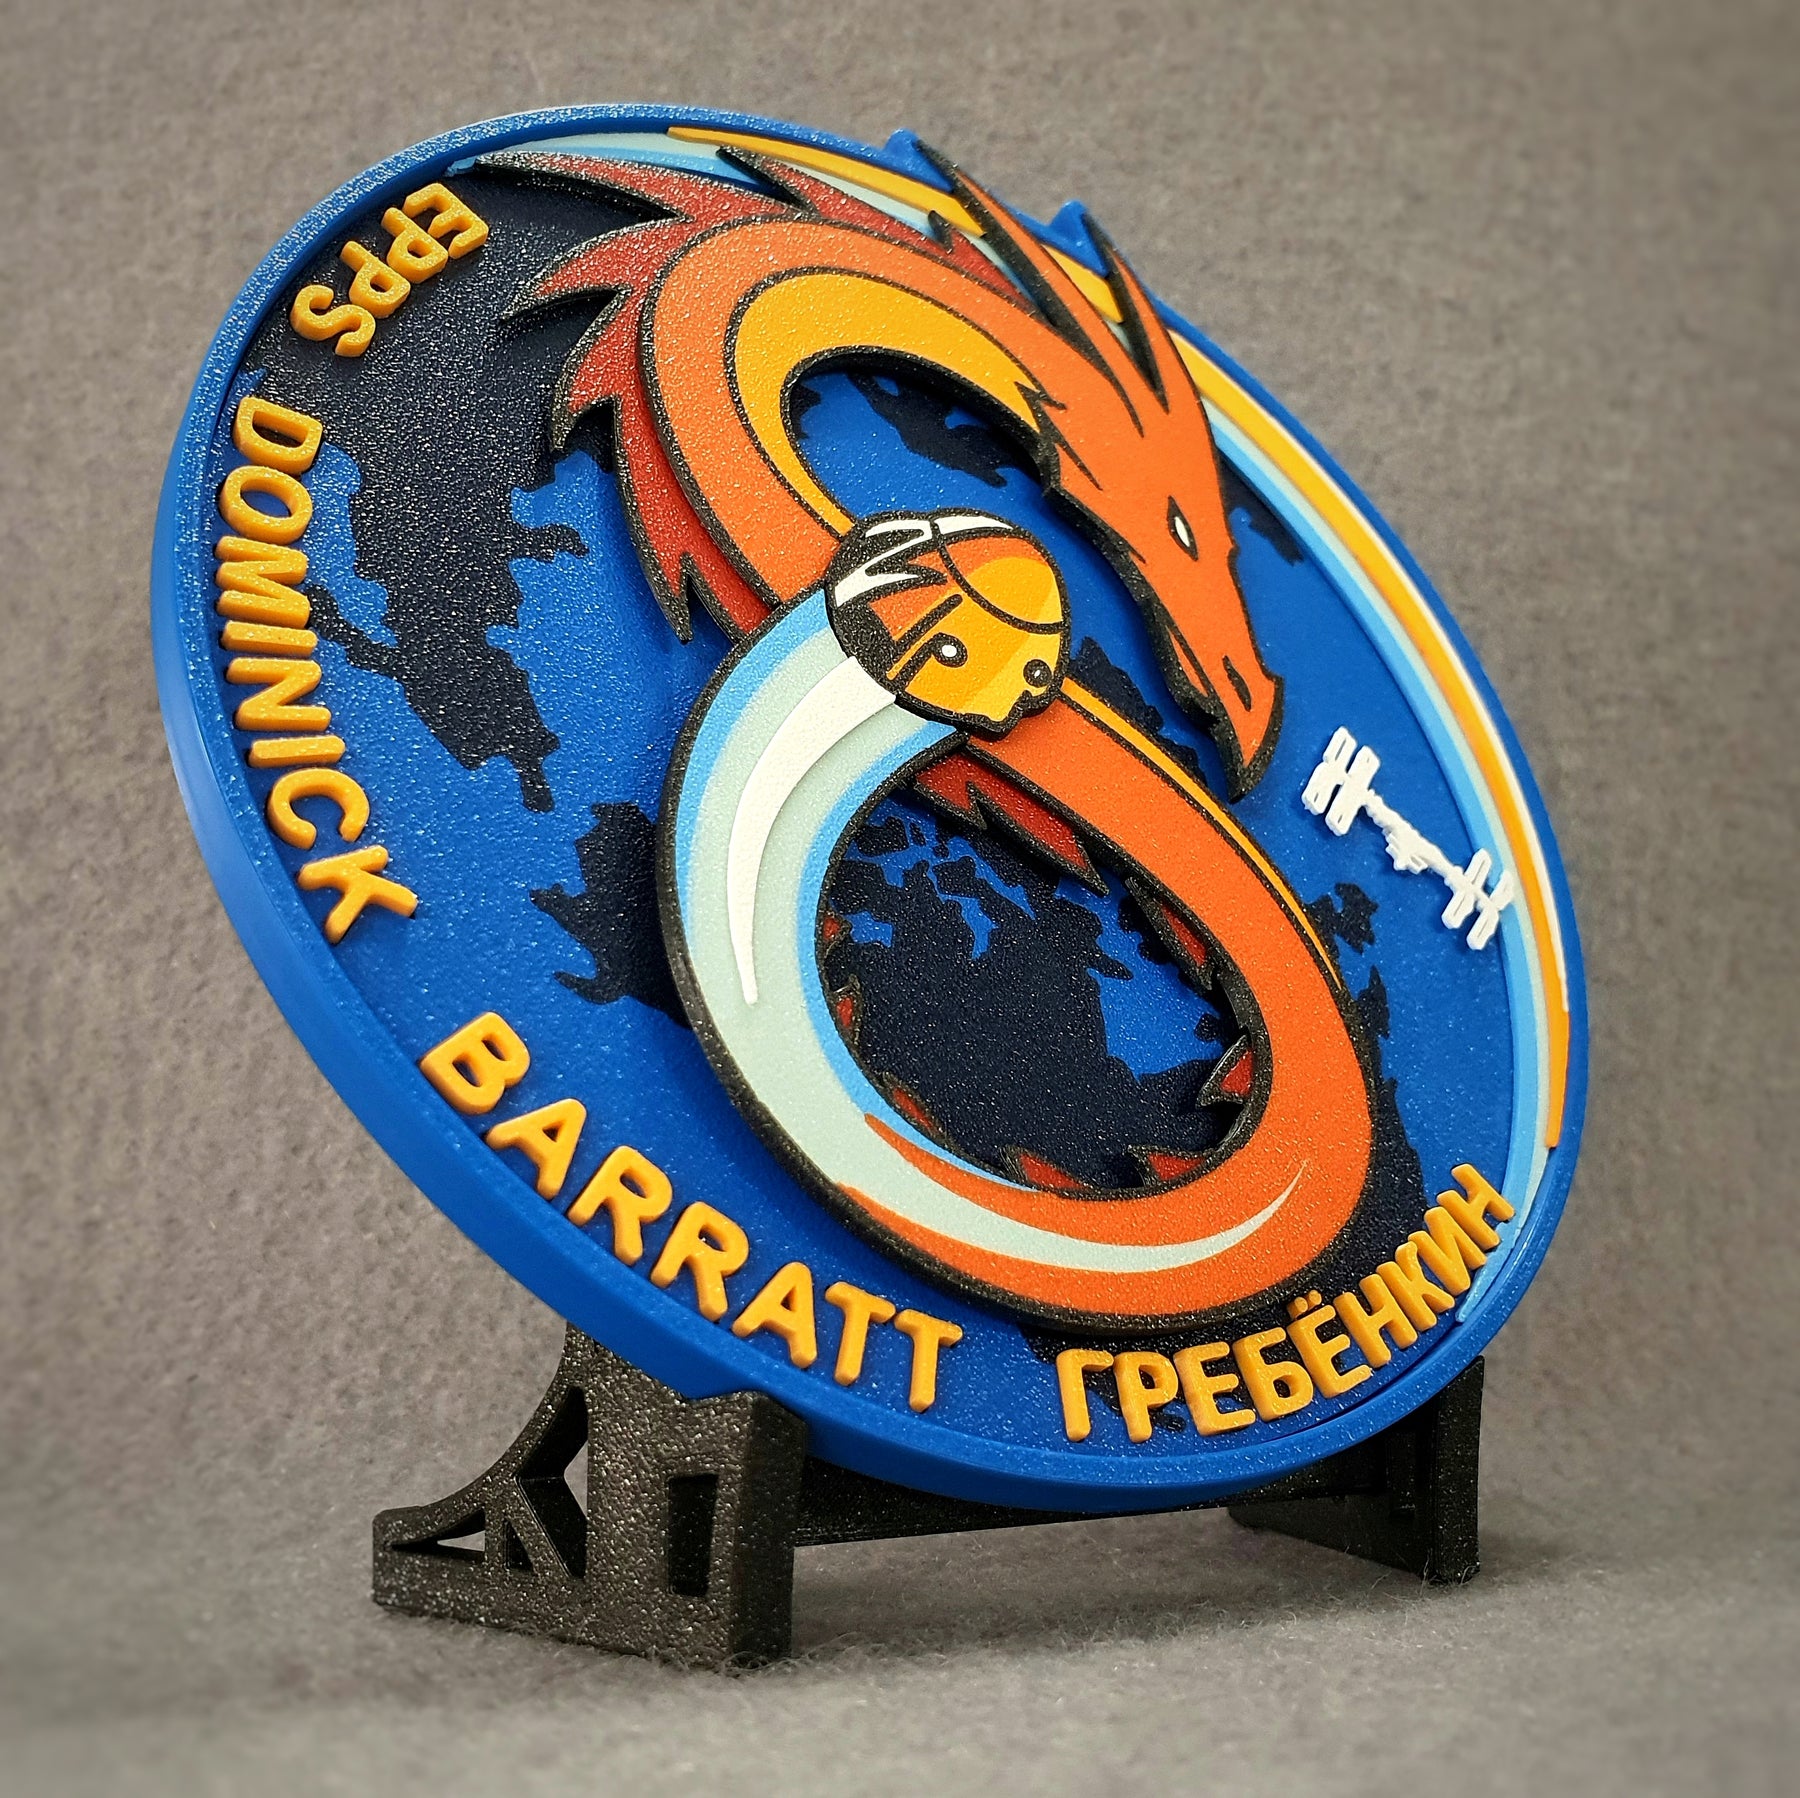 SpaceX - Crew 8 Patch